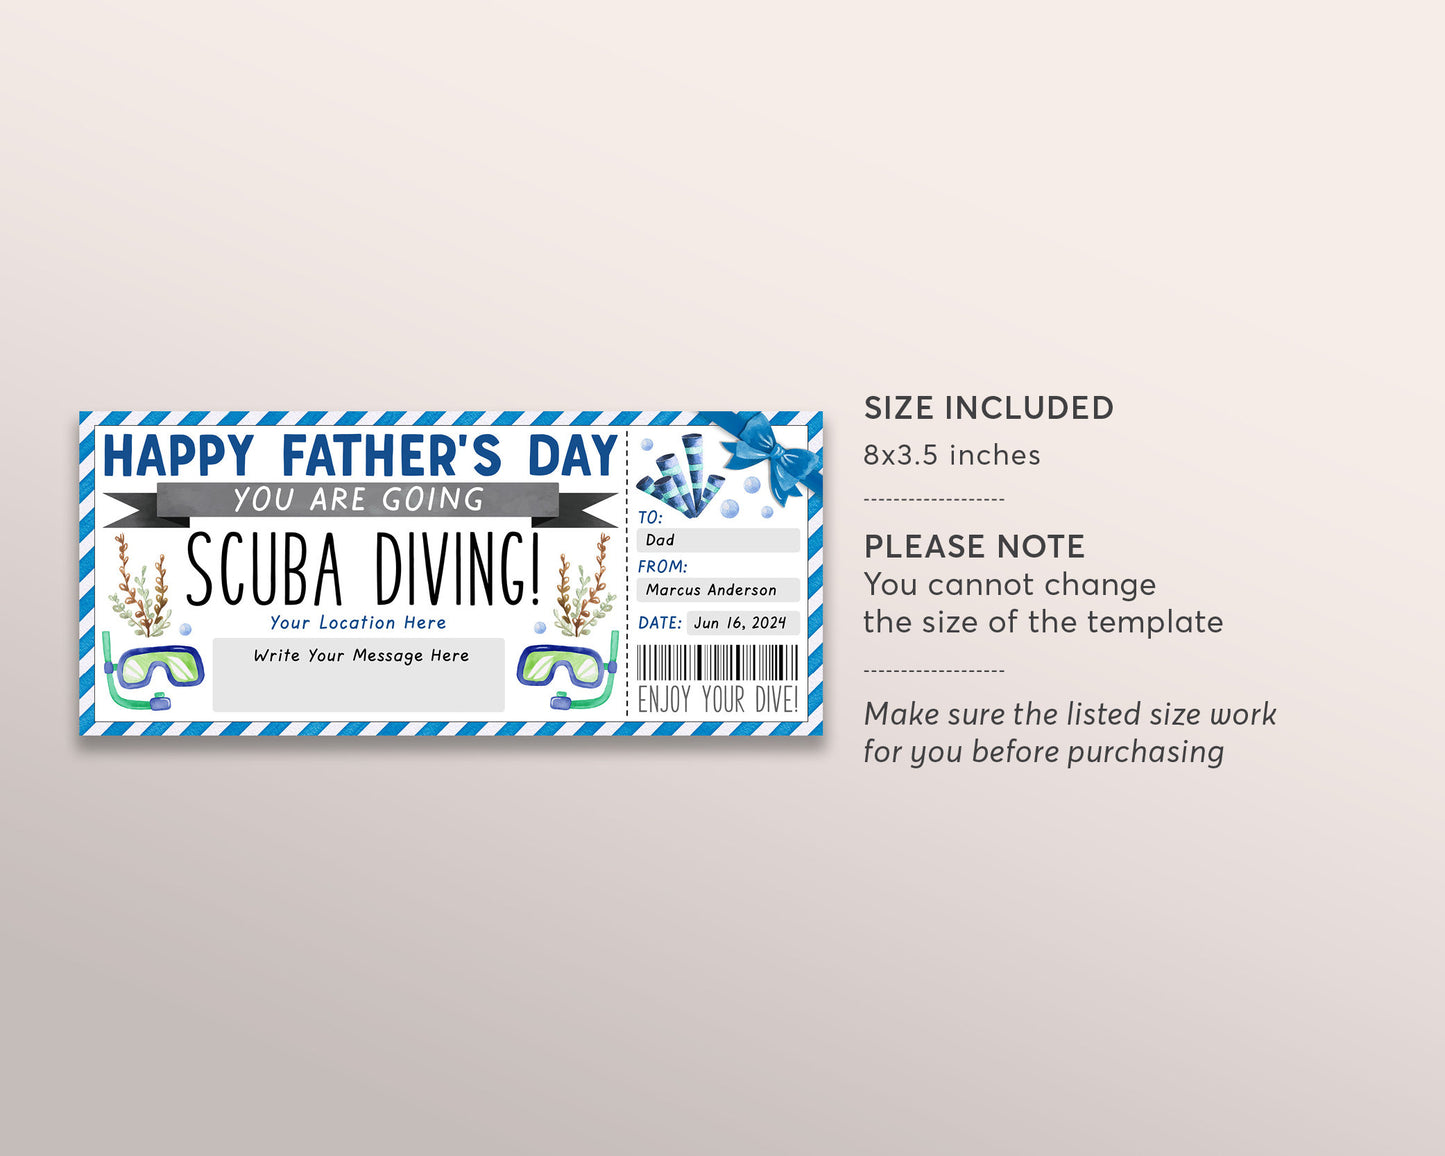 Fathers Day Scuba Diving Ticket Editable Template, Snorkeling Experience Reveal Gift Voucher For Dad, Deep Sea Diving Trip Gift Certificate